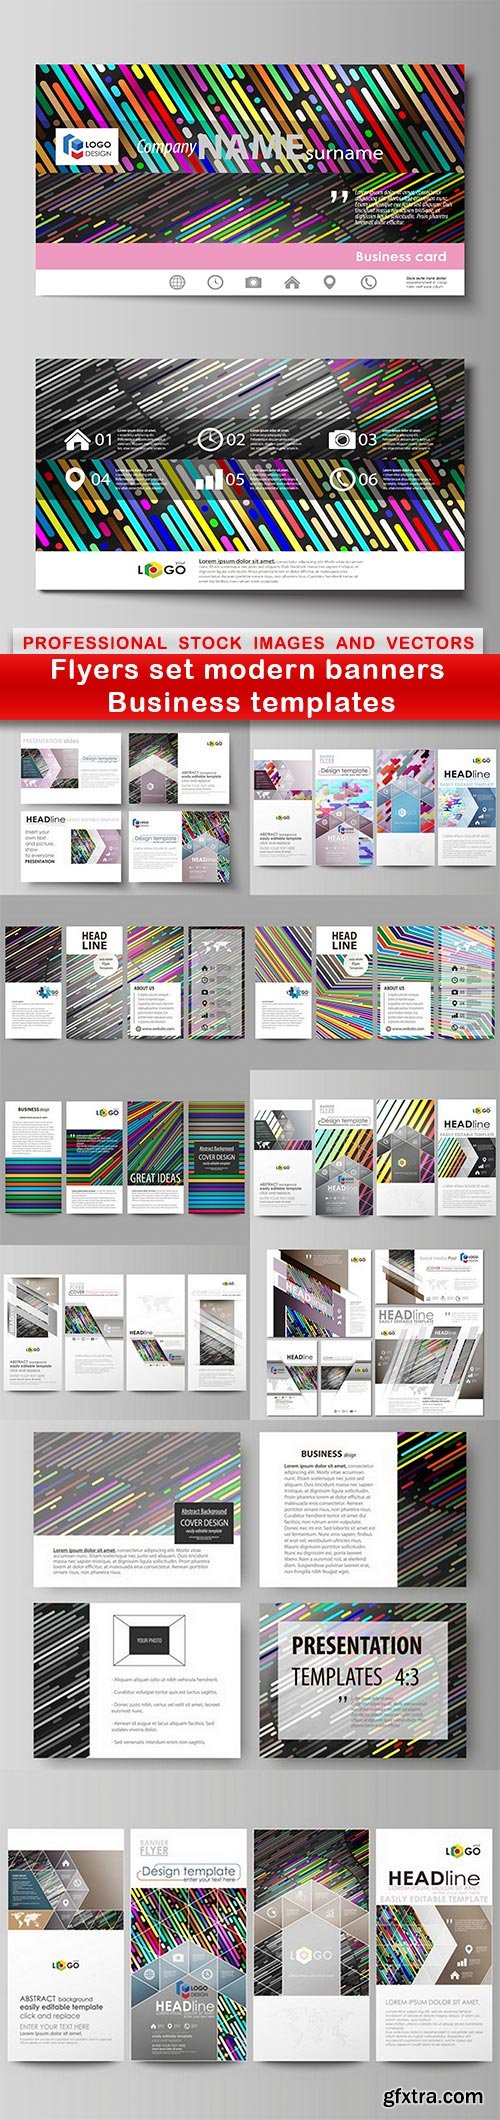 Flyers set modern banners Business templates - 11 EPS